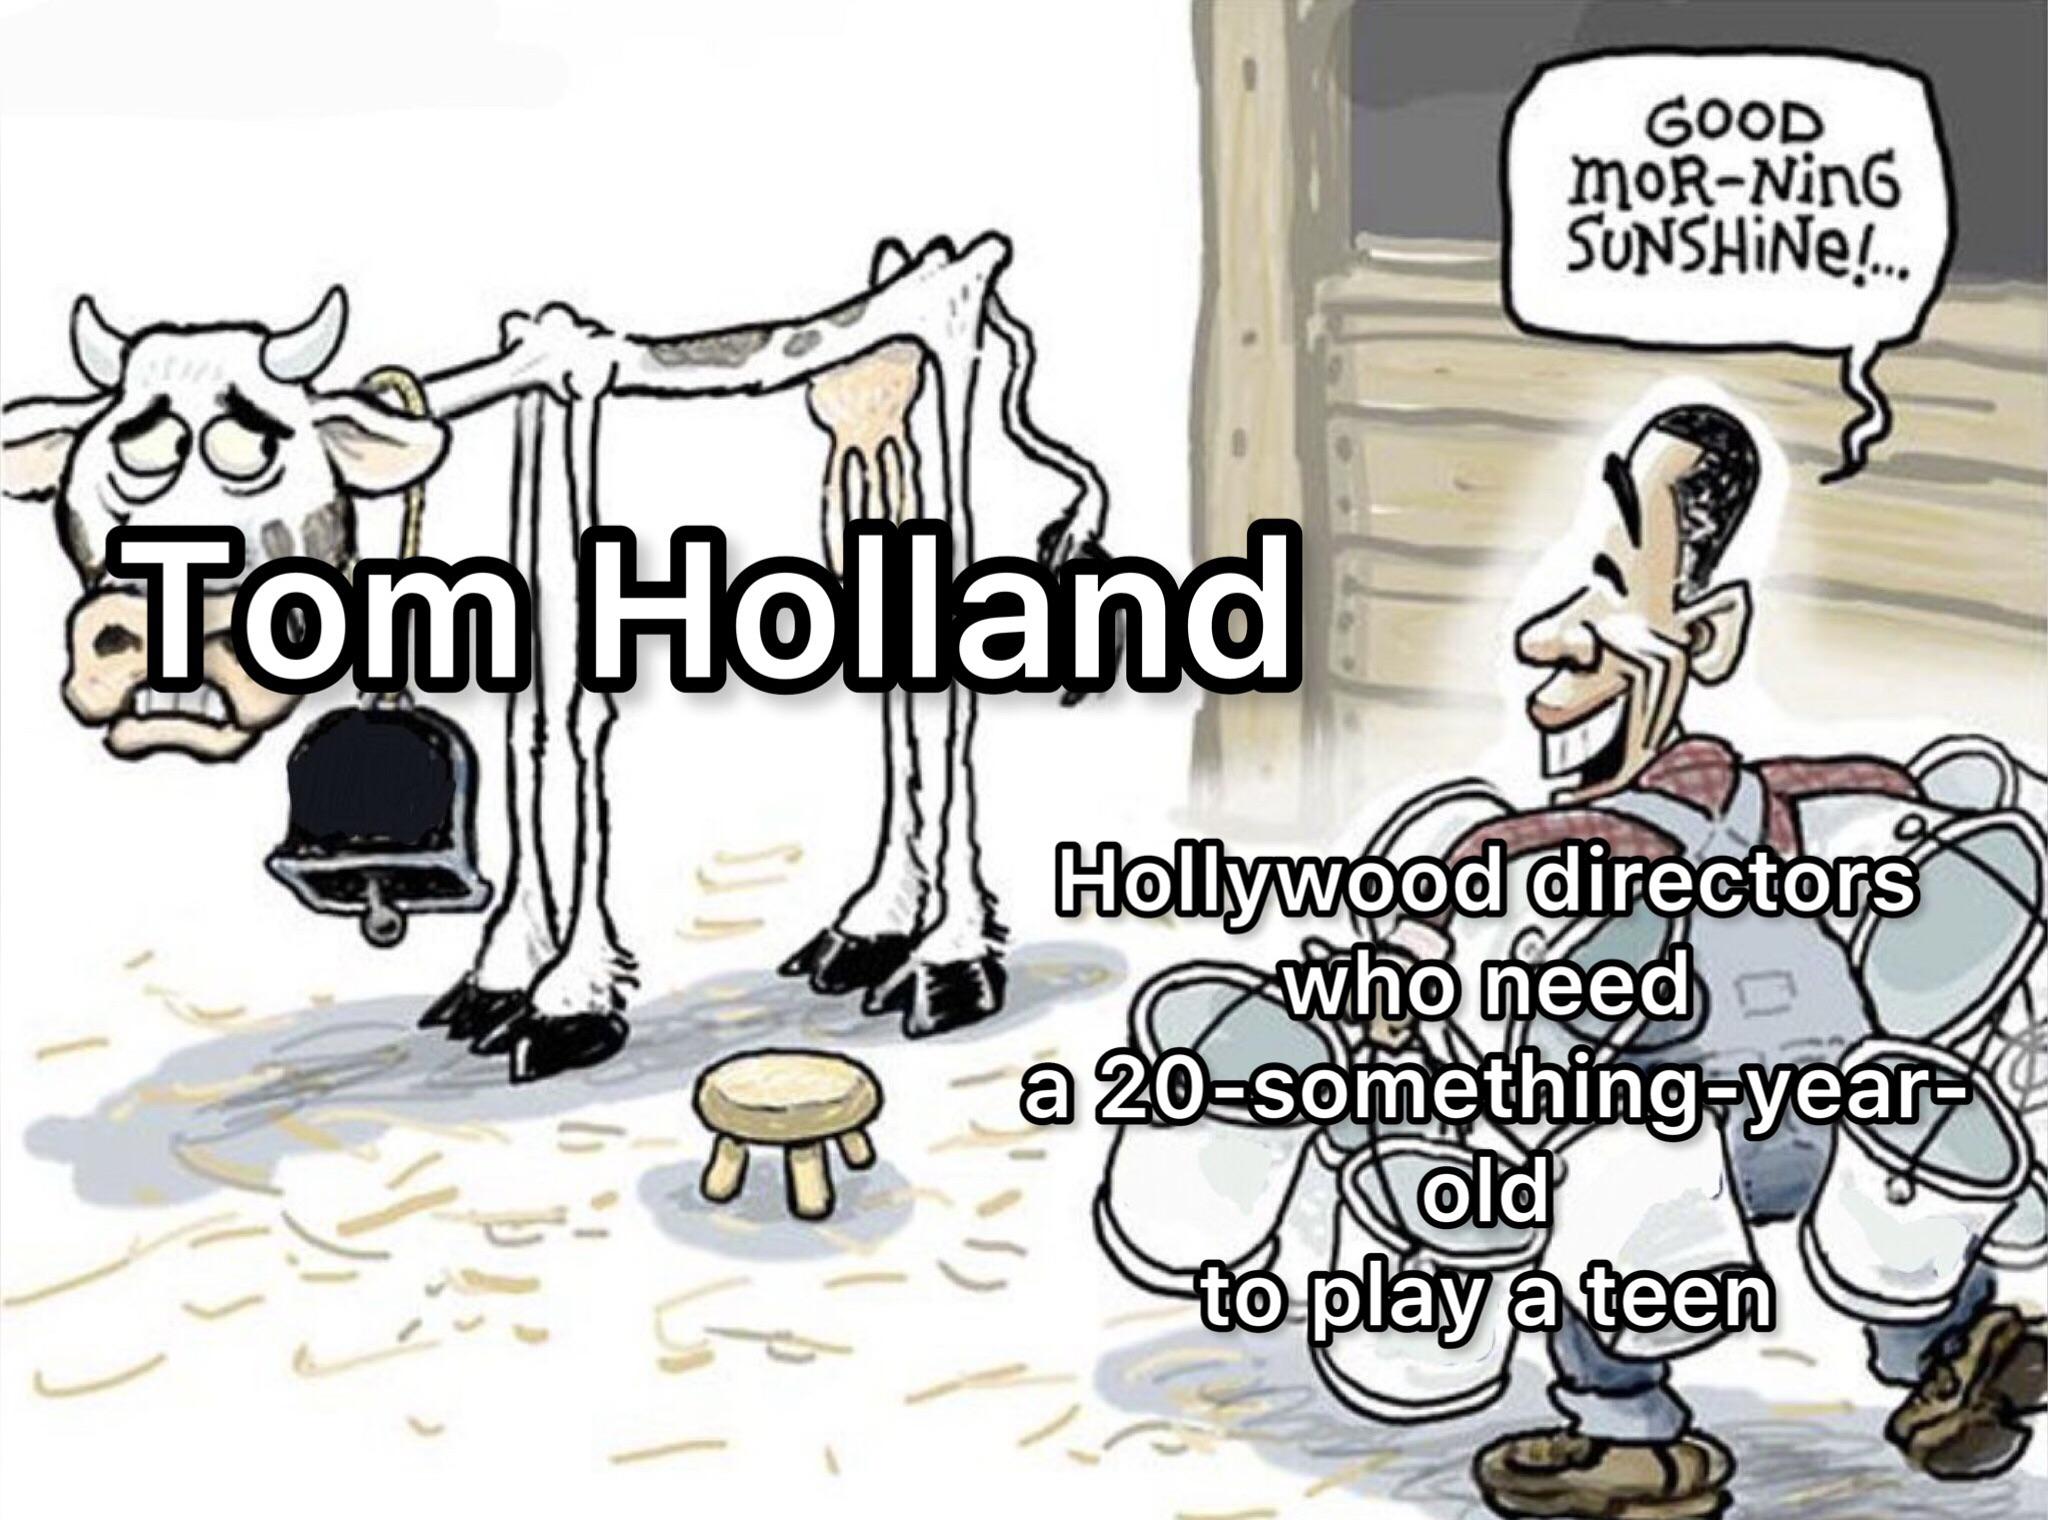 dank memes - funny memes - milking skinny cow - Good morNing Sunshine Tom Holand 0 Hollywood directors who need a 20somethingyear 2006 old to play a teen